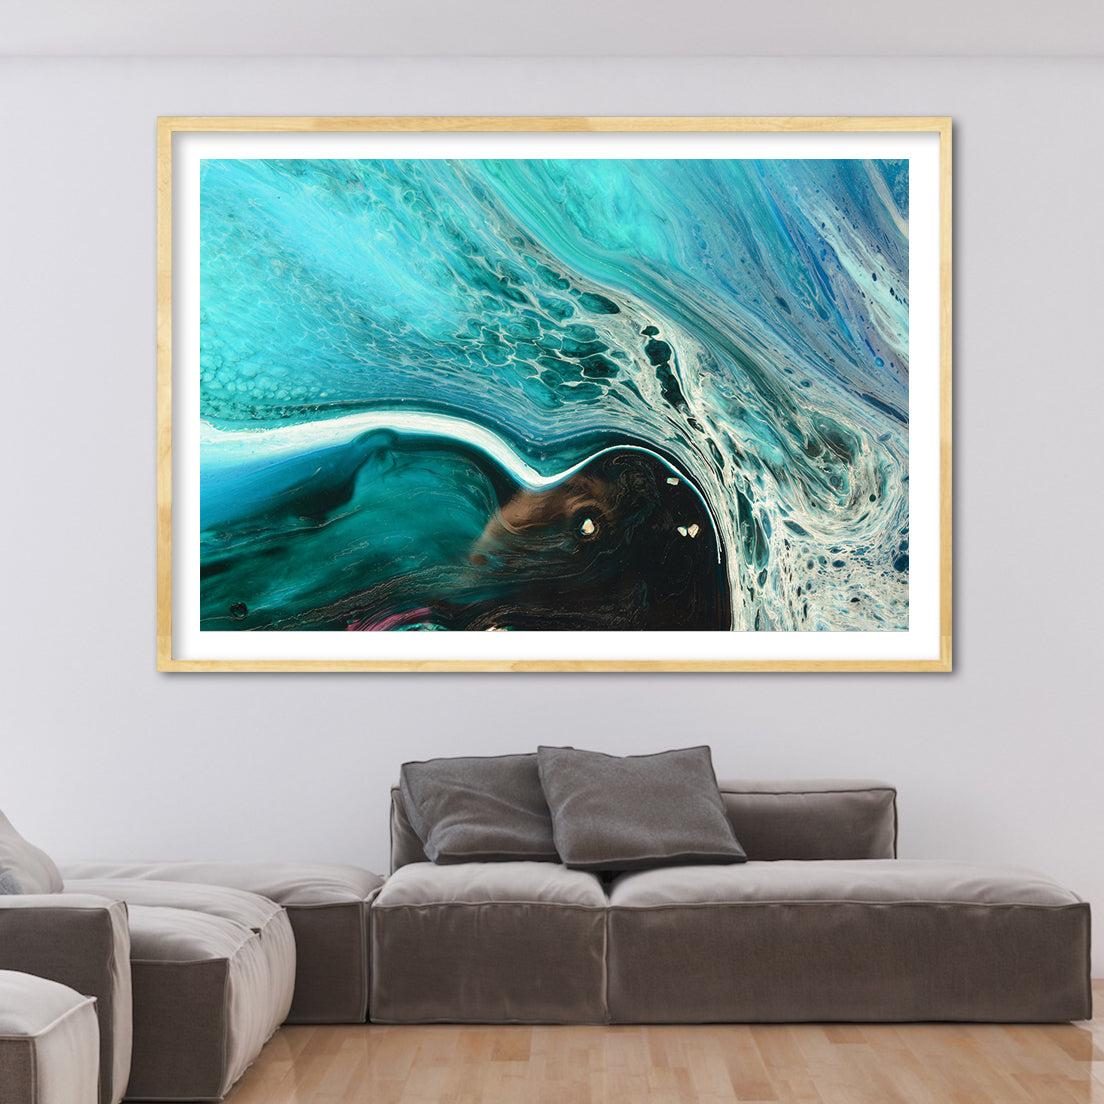 Abstract Seascape. Rise Above Inlet 2 Tropical. Art Print. Antuanelle 4 Tropical Artwork. Limited Edition Print